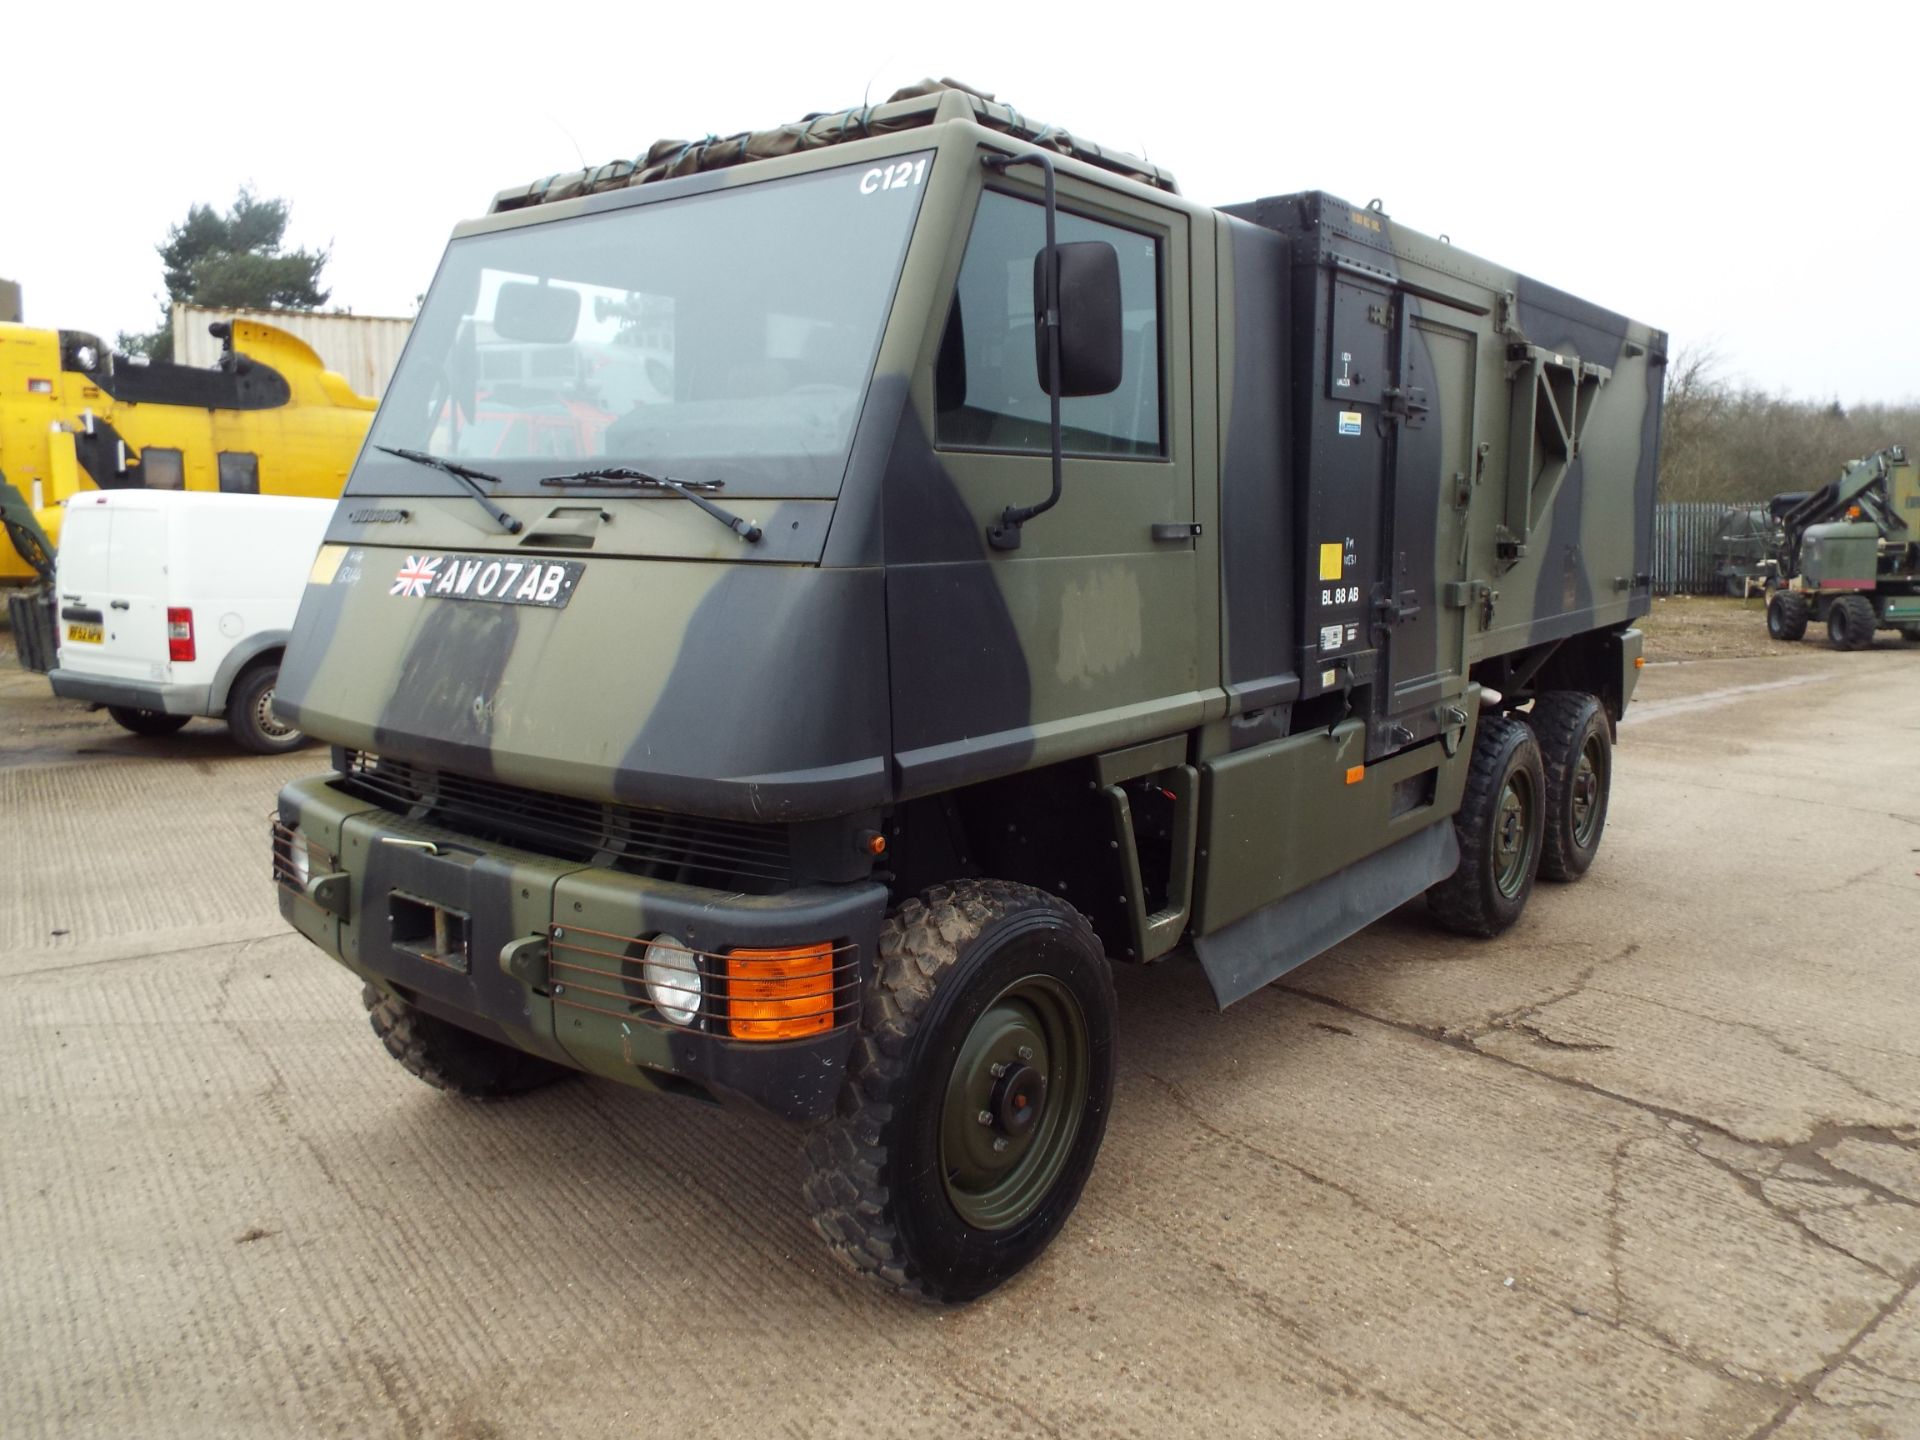 Ex Reserve Left Hand Drive Mowag Bucher Duro II 6x6 High-Mobility Tactical Vehicle - Image 3 of 31